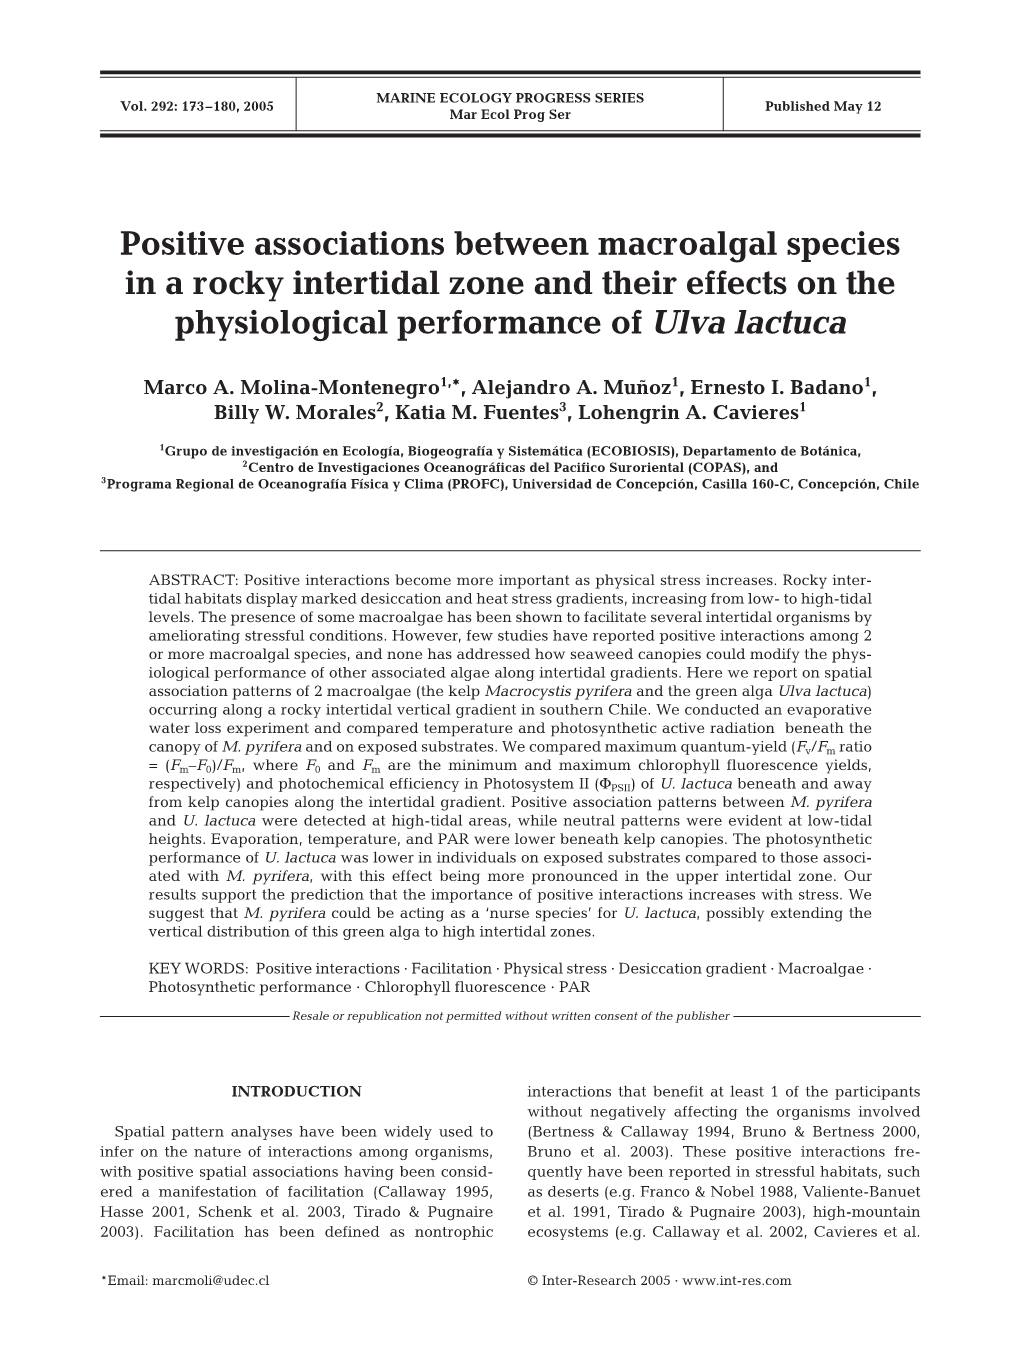 Positive Associations Between Macroalgal Species in a Rocky Intertidal Zone and Their Effects on the Physiological Performance of Ulva Lactuca